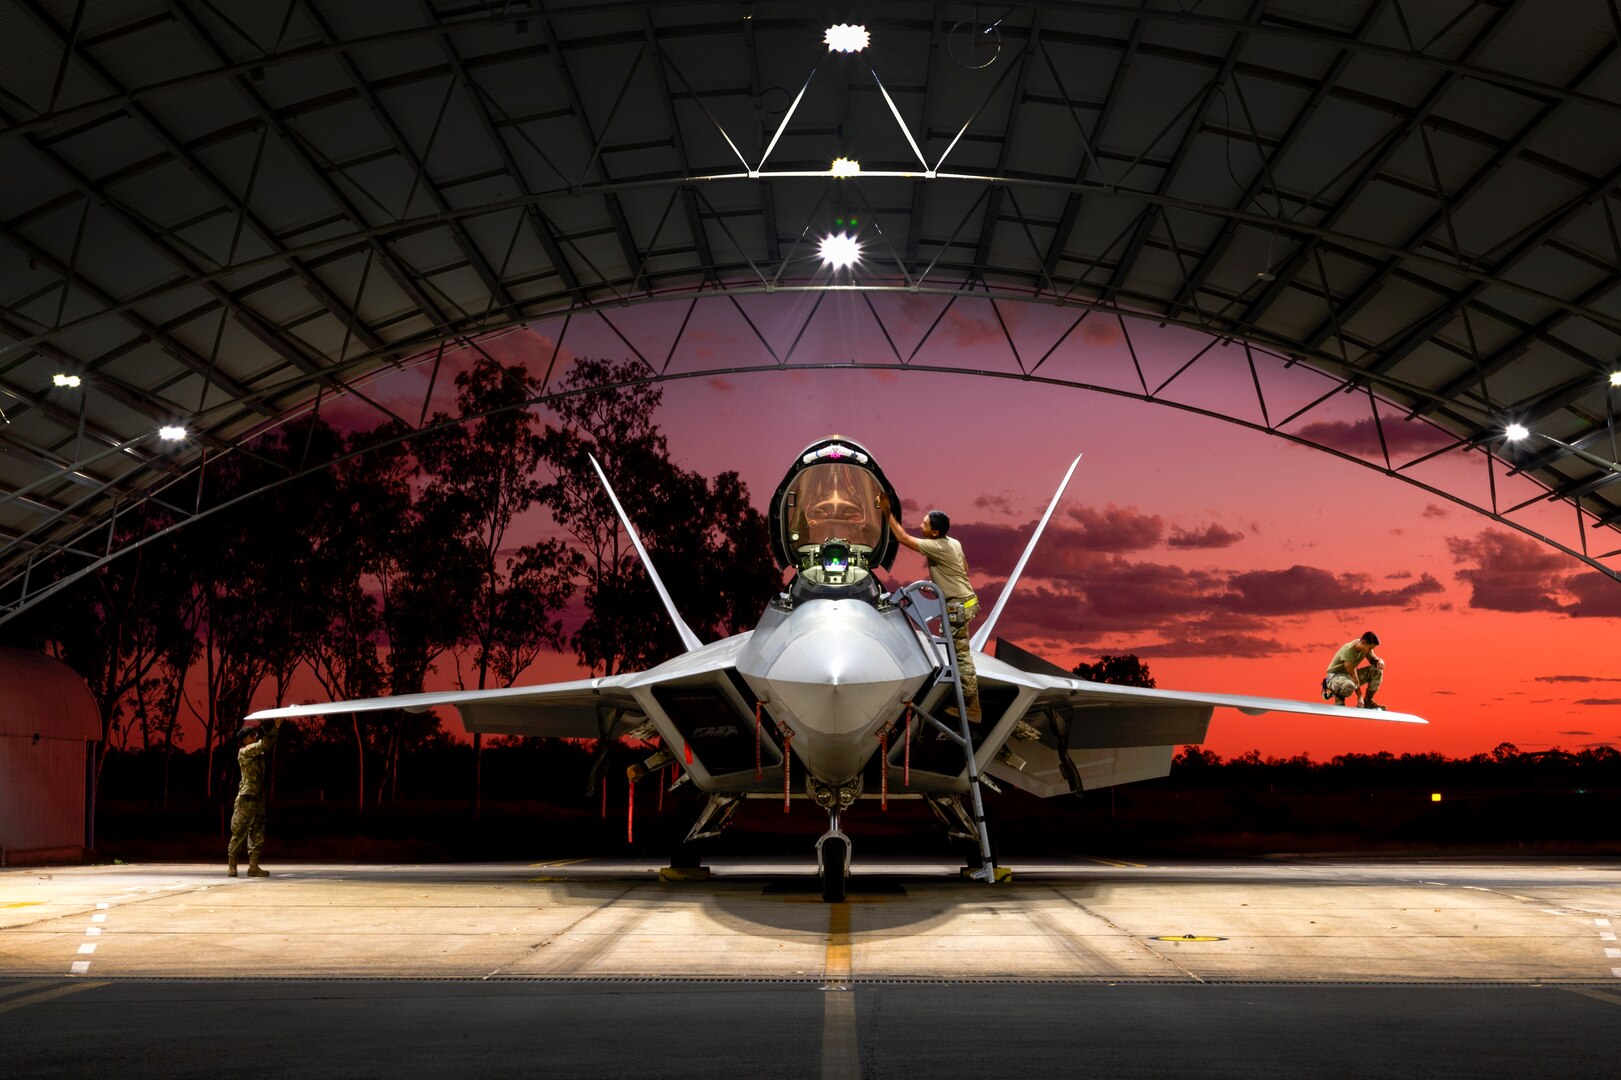 U.S Air Force crew chiefs from the Hawaiian Raptor Expeditionary Squadron, a Total Force Integrated unit based out of Joint Base Pearl Harbor-Hickam, conduct a basic post-flight inspection of an F-22A Raptor at Royal Australian Air Force Base Tindal, Northern Territory, Australia, Sept. 8, 2022. Opportunities to train alongside allies and partners enhance interoperability and bolster collective ability to support a free and open Indo-Pacific.